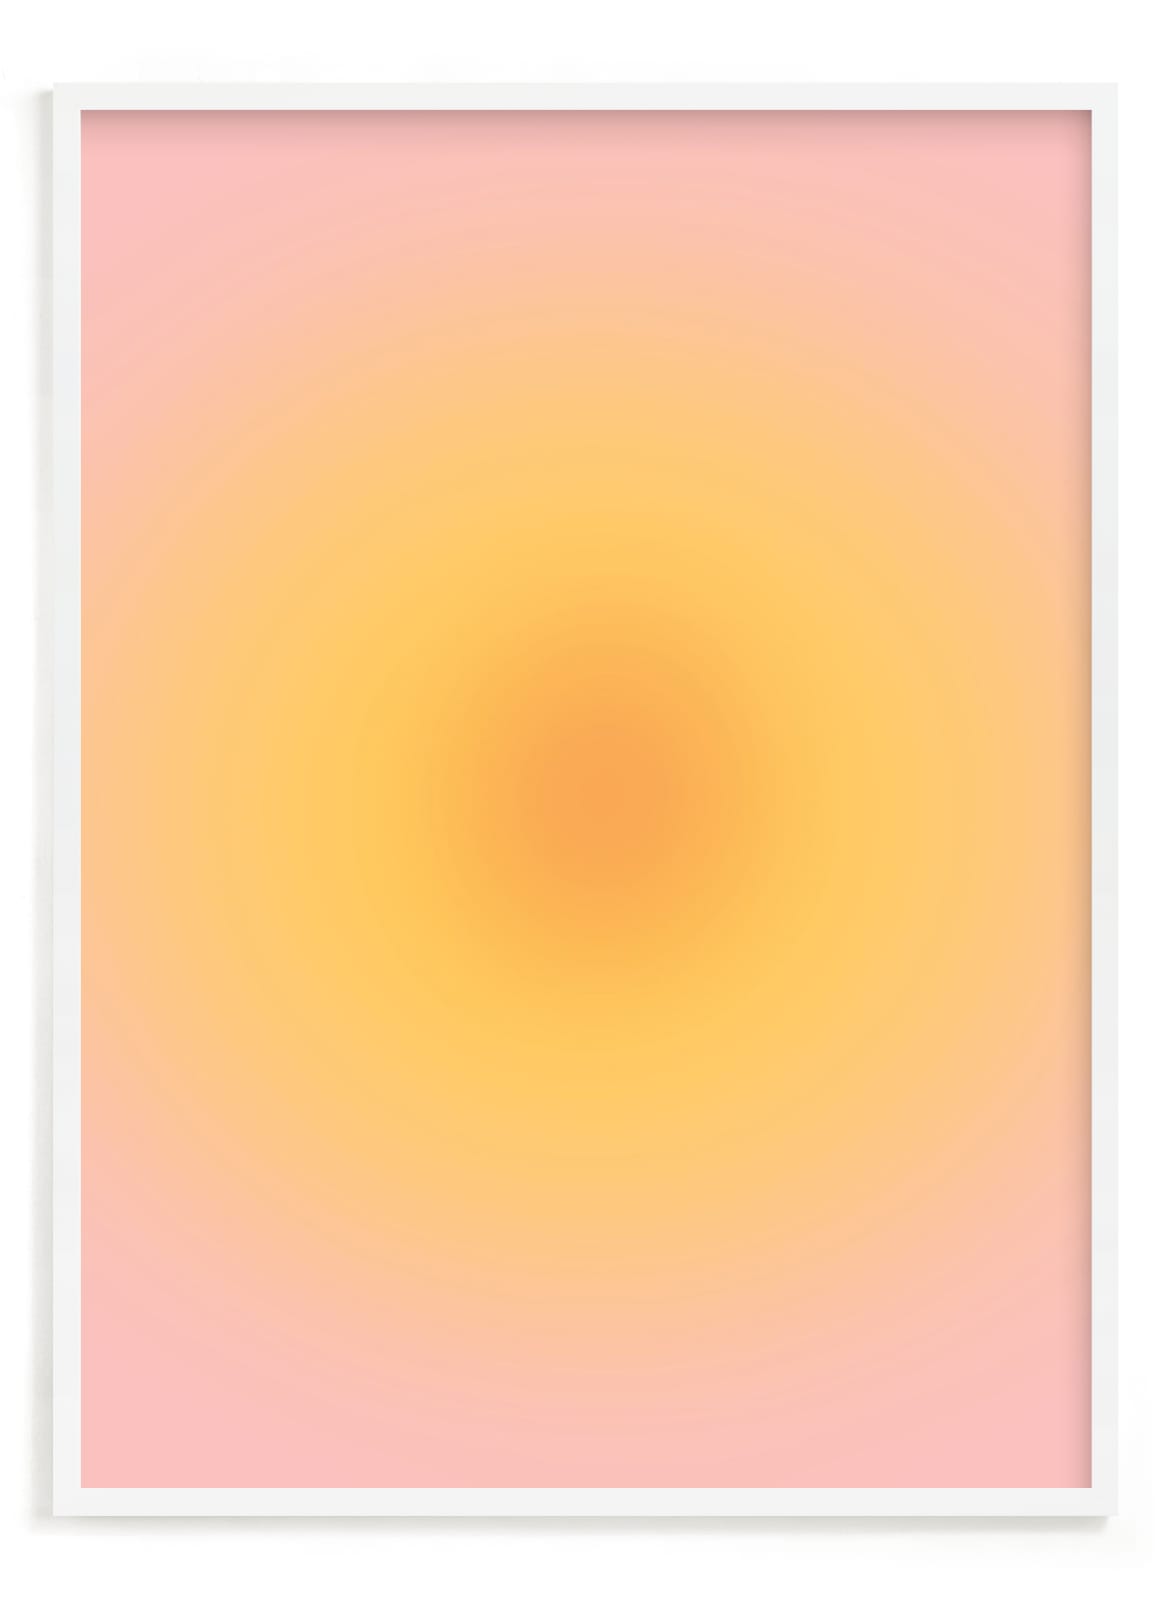 Shop Soft Sun; 44x66 Size; Art Print; Frame: Black Wood from Minted on Openhaus